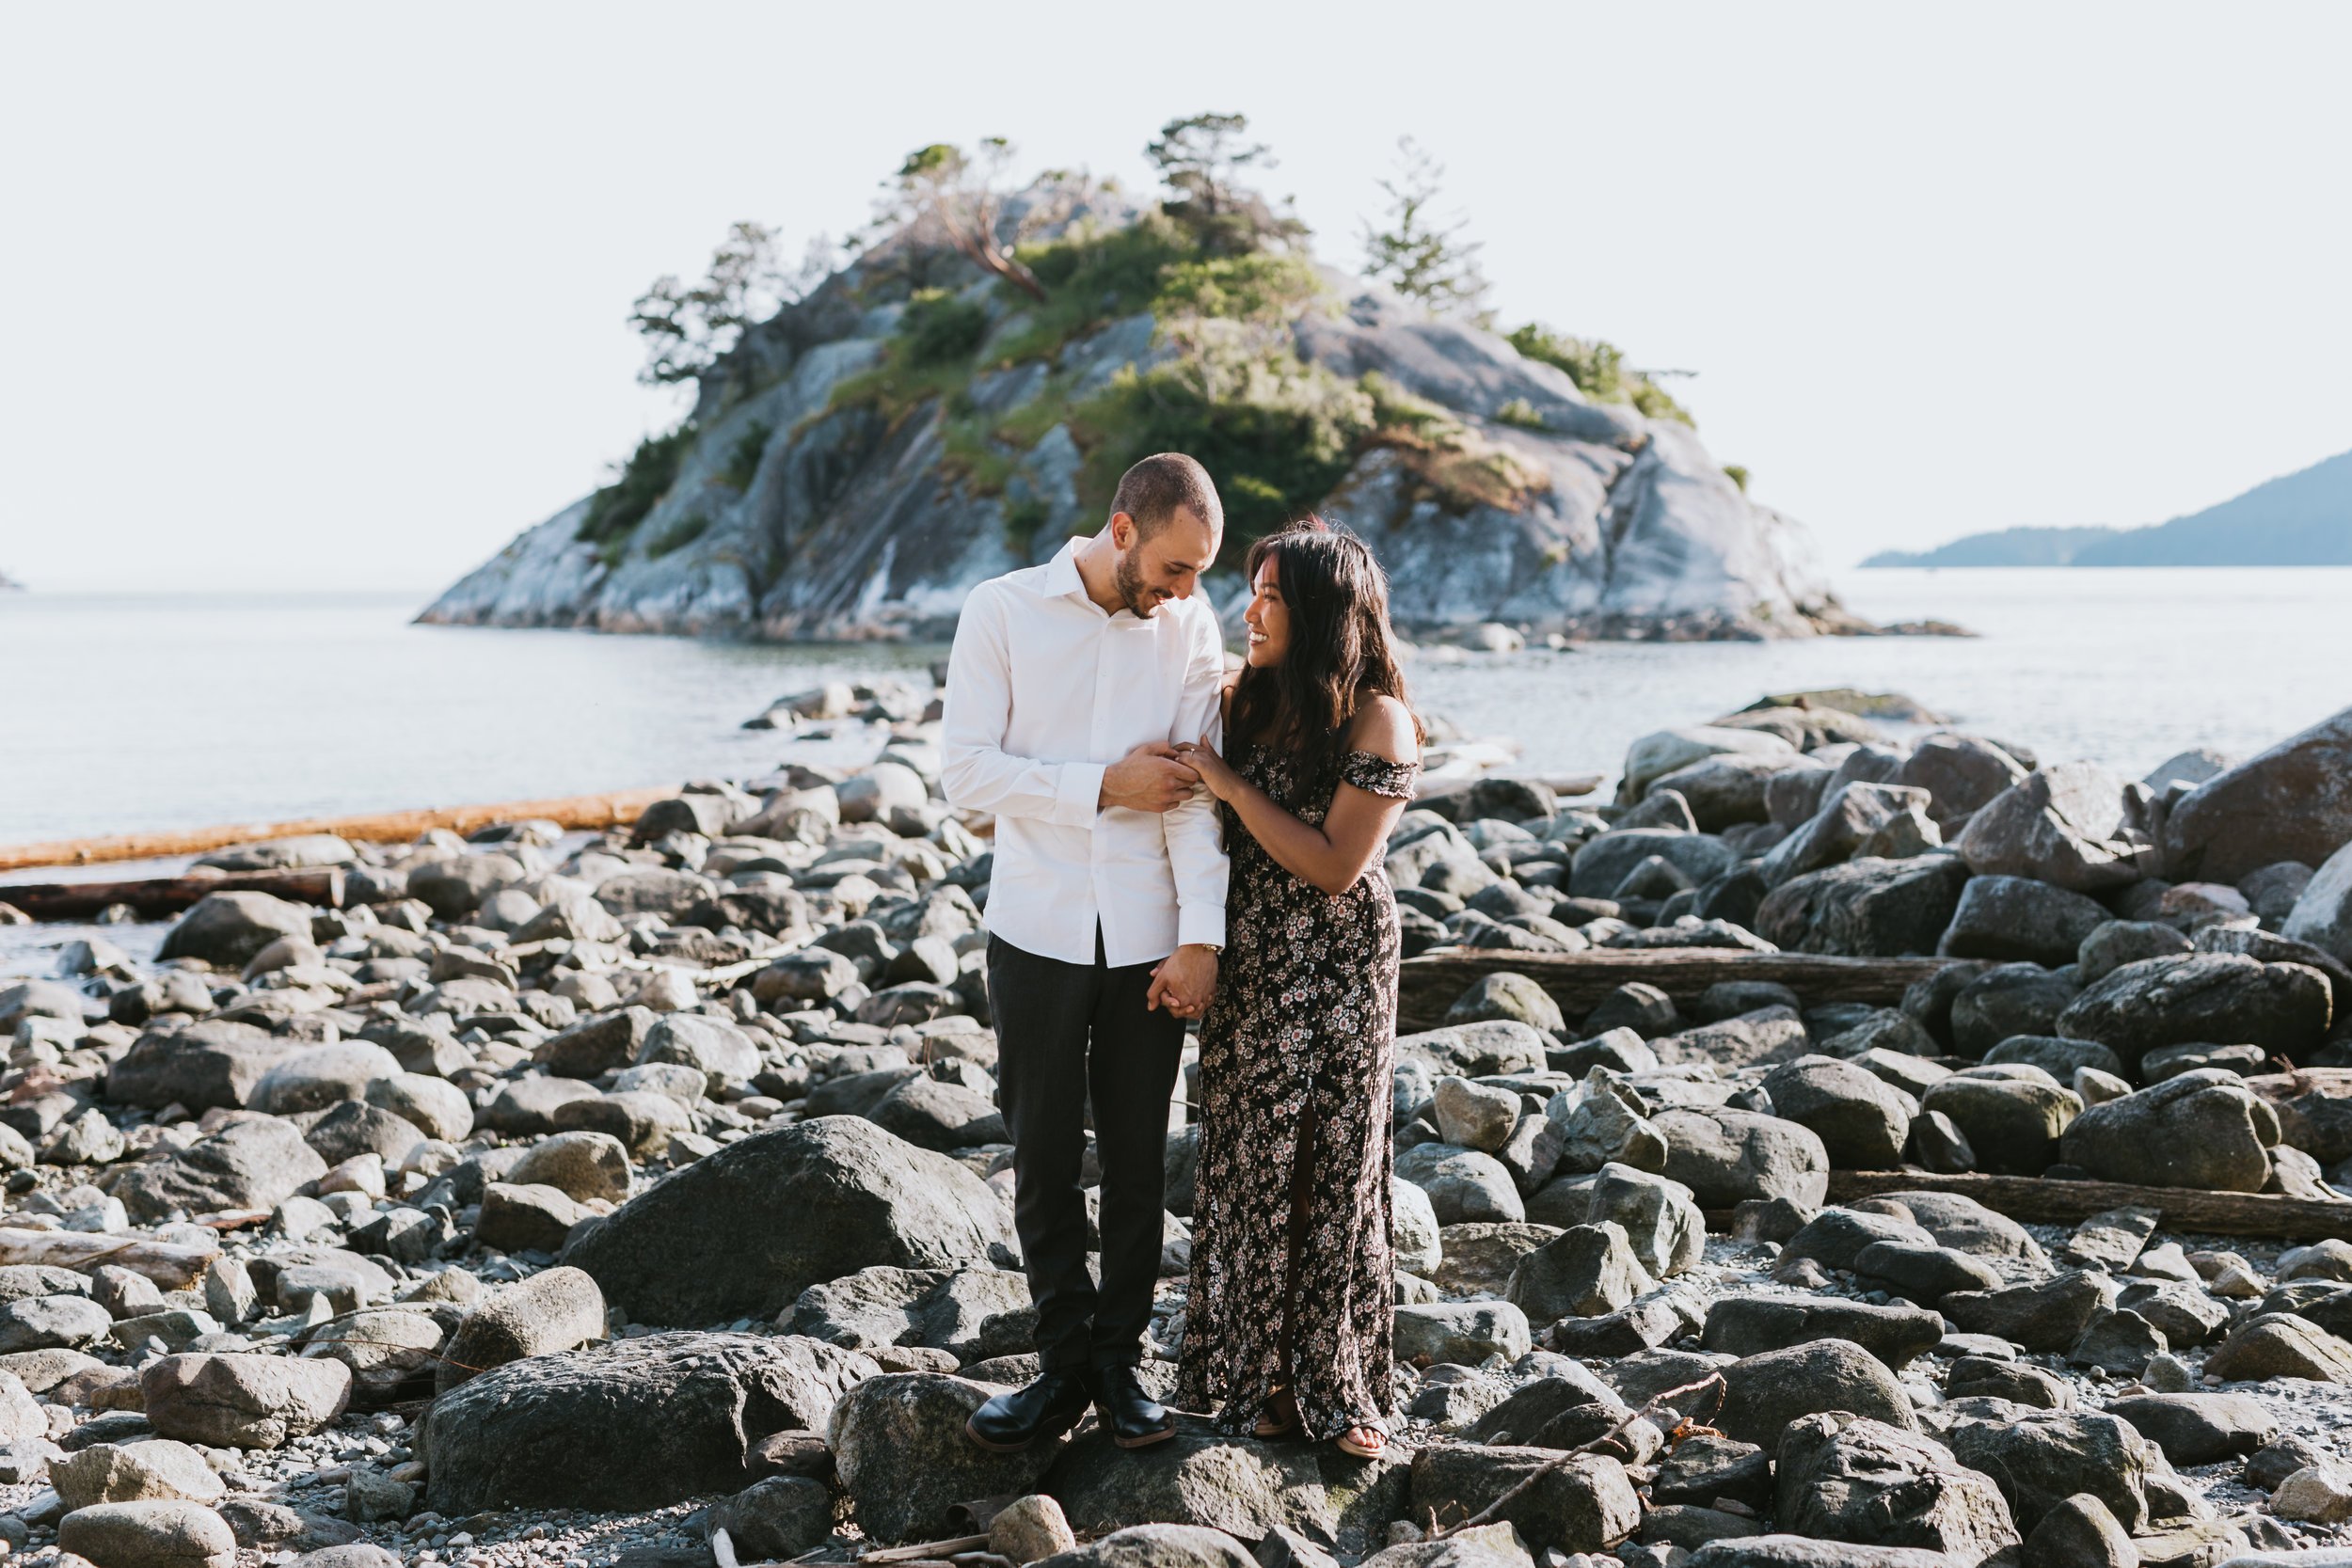 oliver-rabanes-vancouver-surrey-whytecliff-park-proposal-engagement-photography-29.JPG